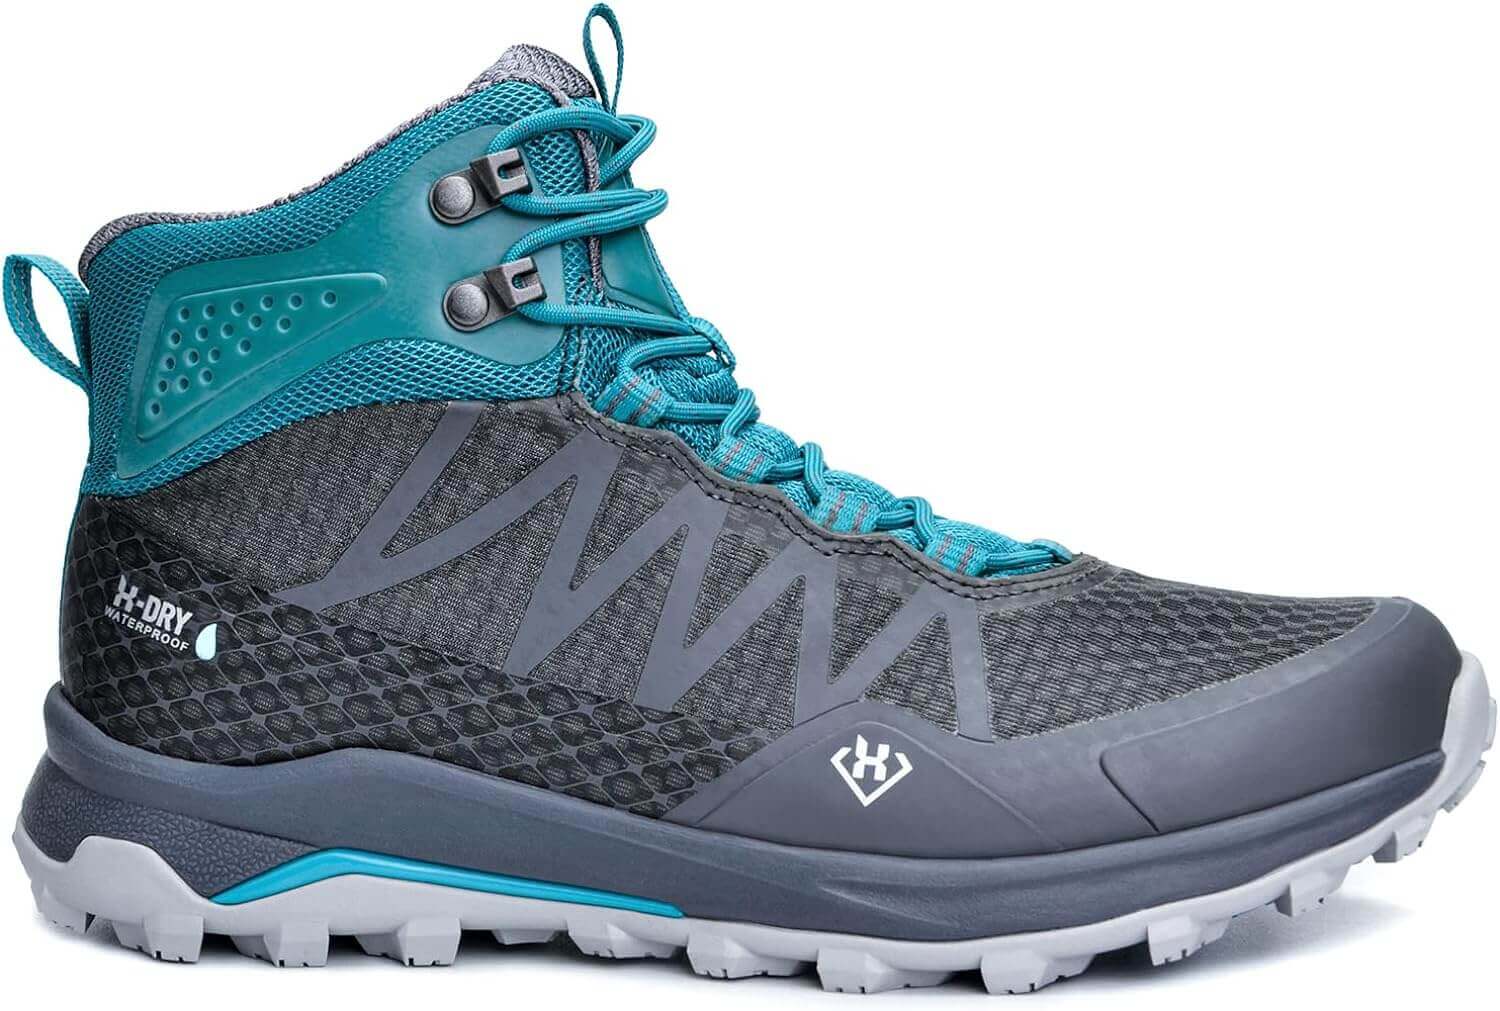 Shop The Latest >XPETI Women’s Fastrail II Speed Hiking Boots > *Only $80.99*> From The Top Brand > *XPETIl* > Shop Now and Get Free Shipping On Orders Over $45.00 >*Shop Earth Foot*